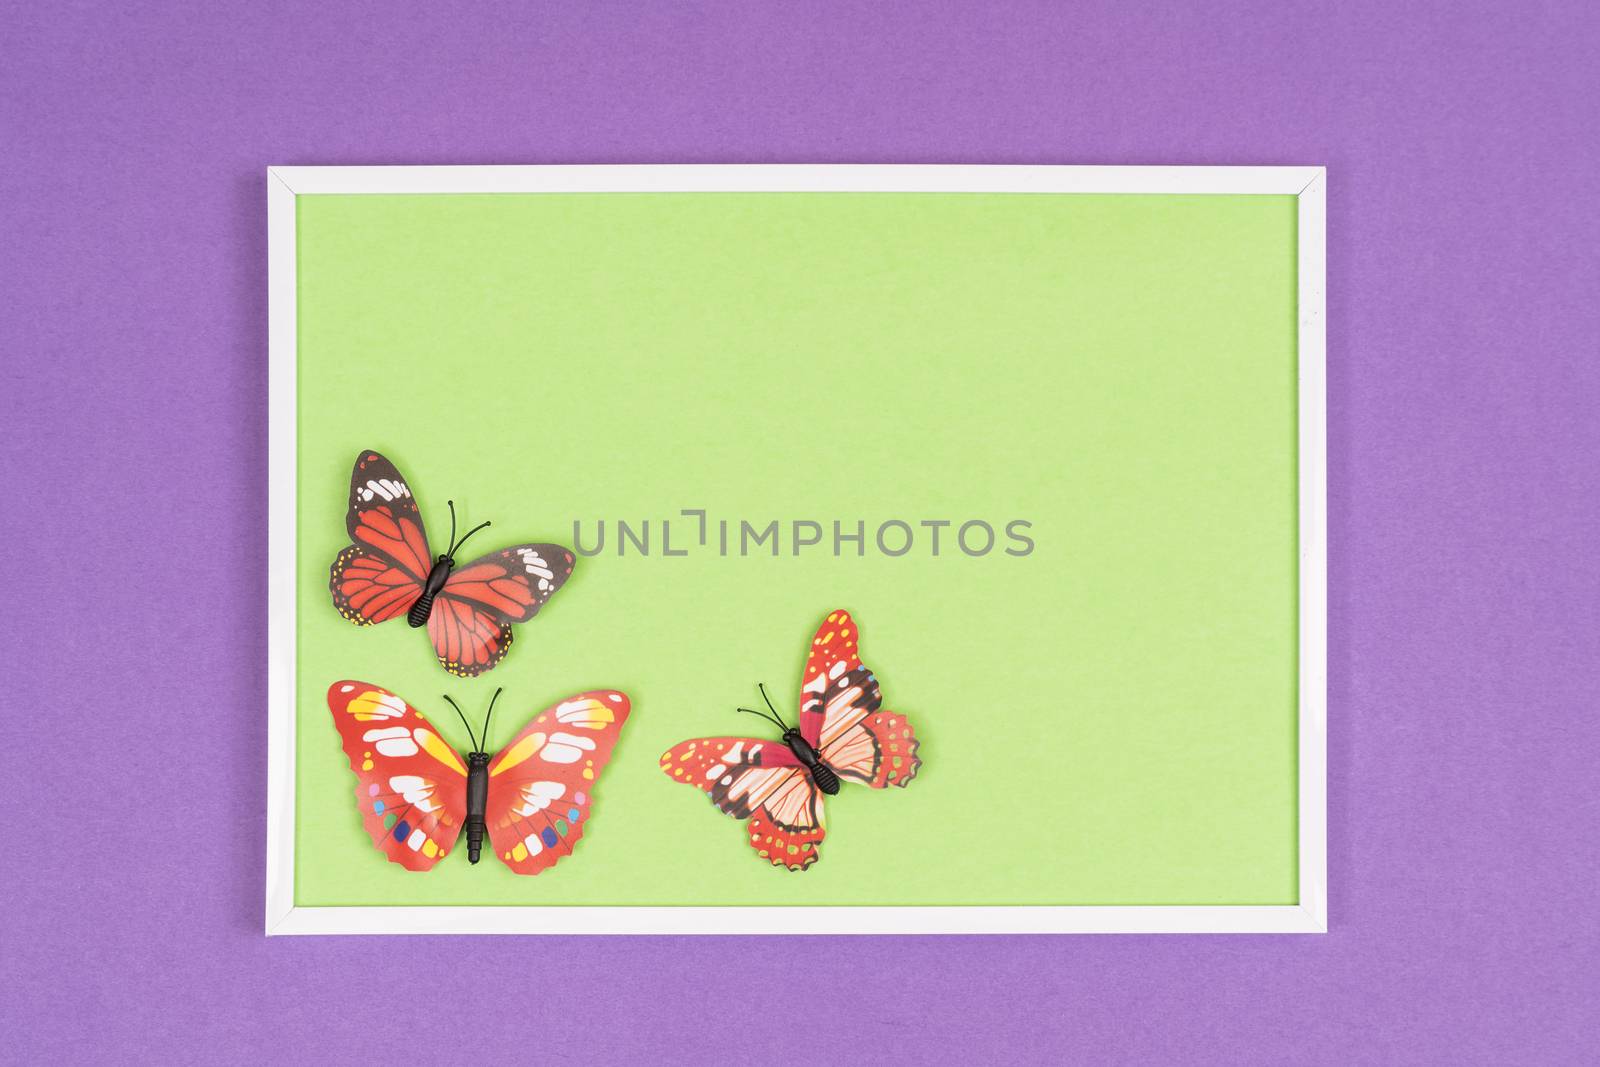 Decorative butterflies by sergiodv